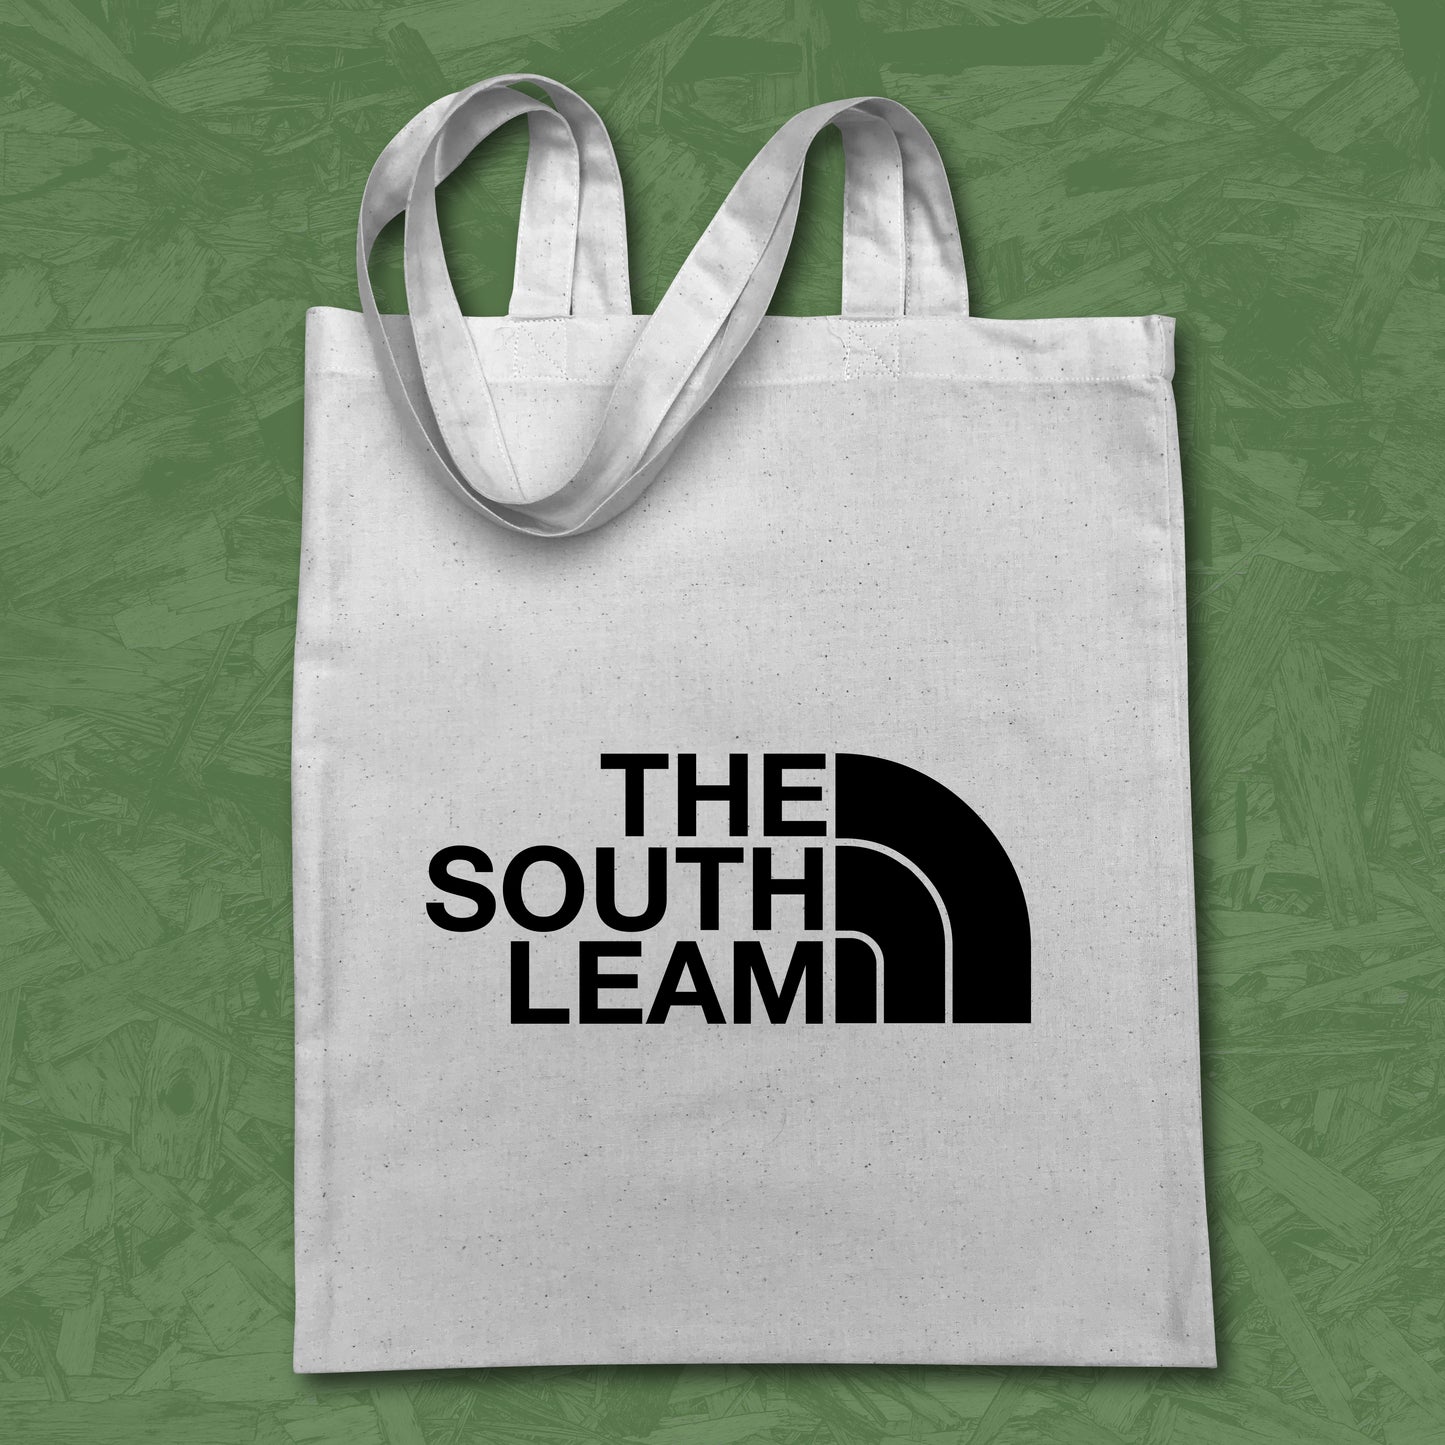 The South Leam Tote Bag